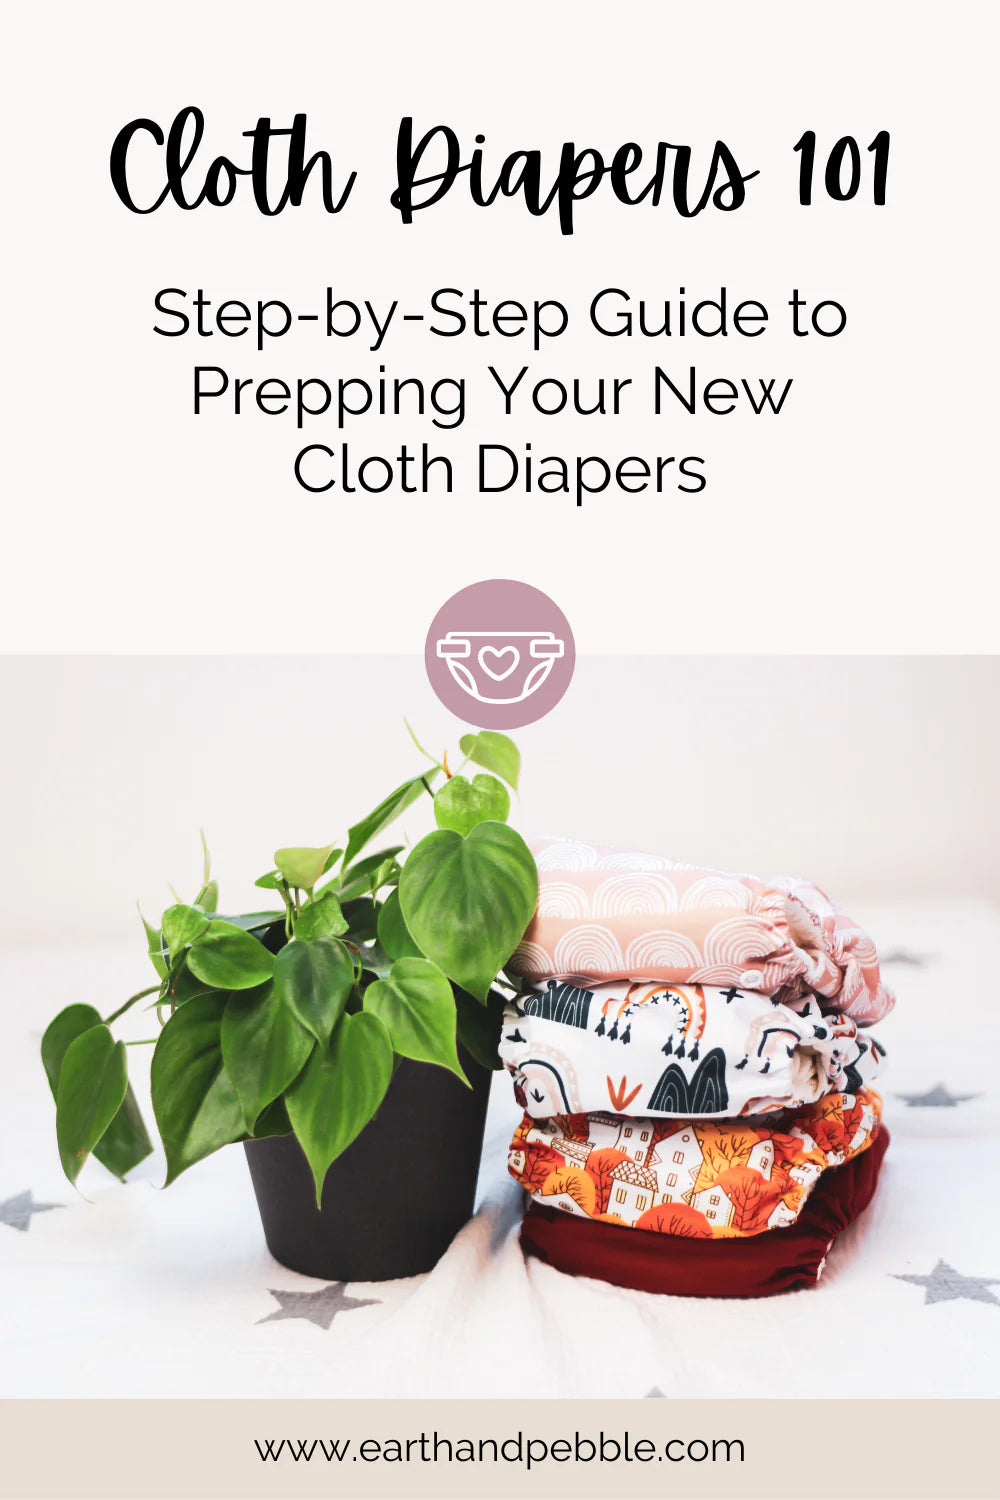 Prepping your new diapers